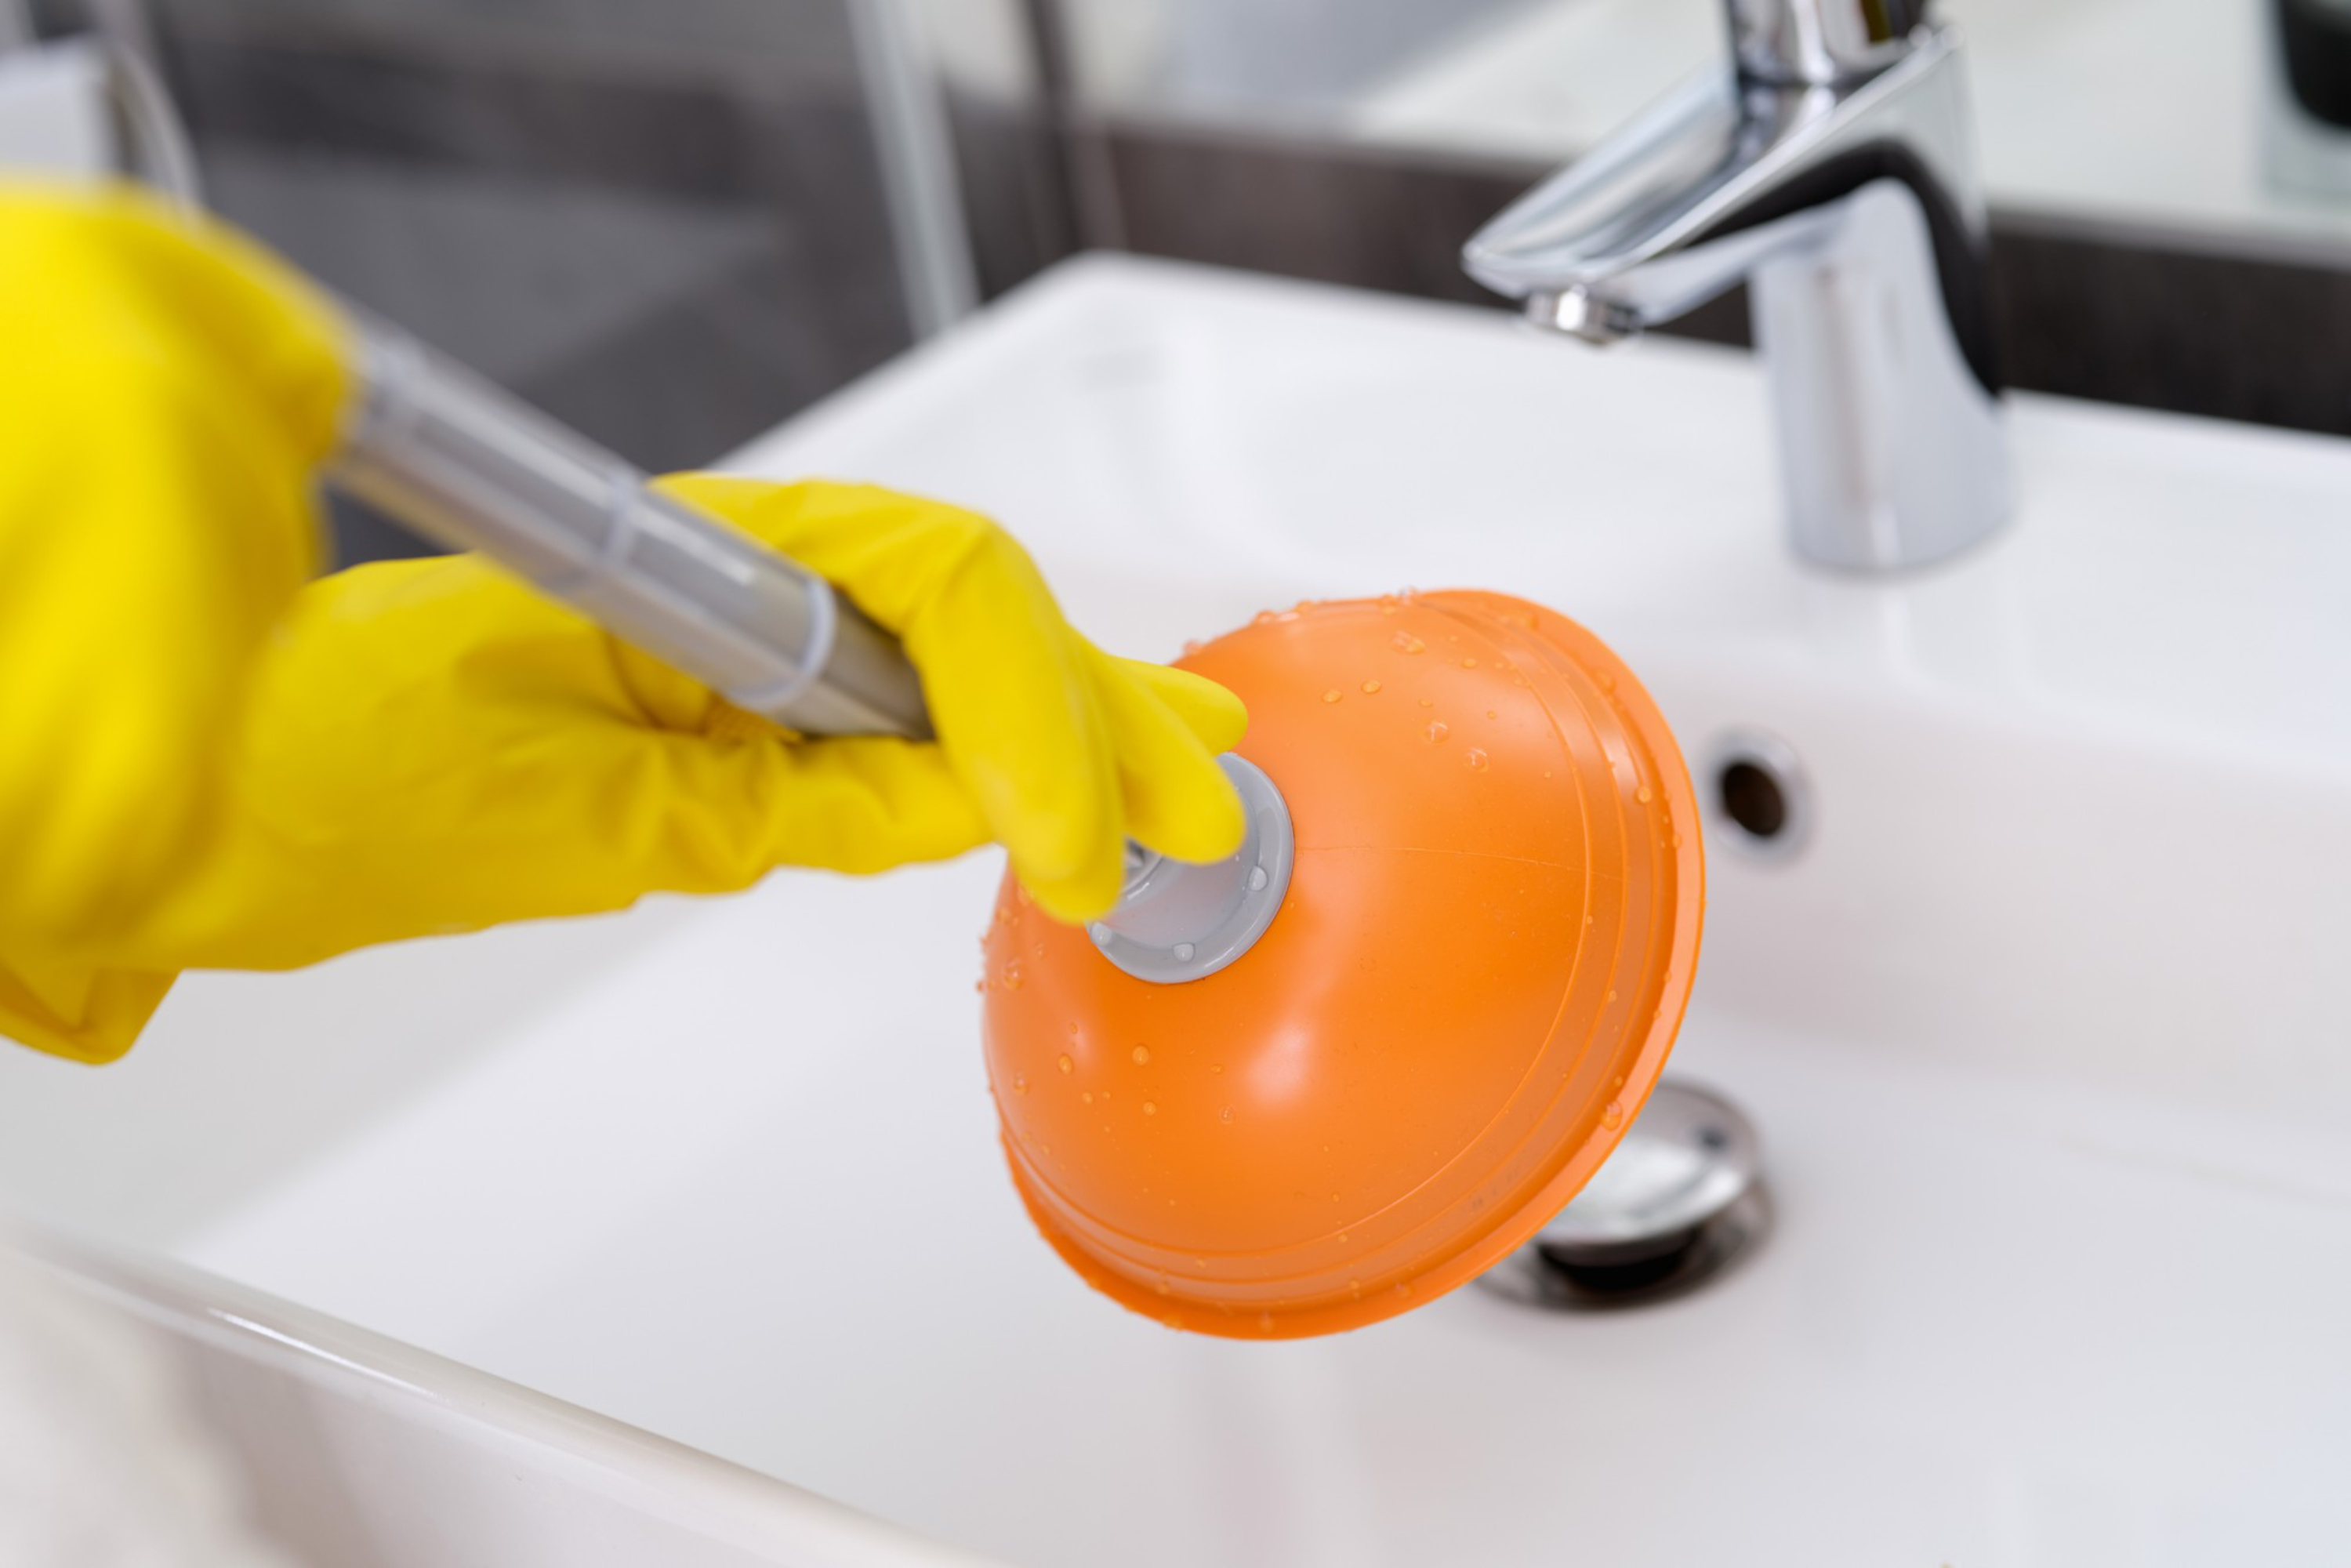 plumber-with-rubber-gloves-cleaning-sink-with-plunger-bathroom-closeup.jpg